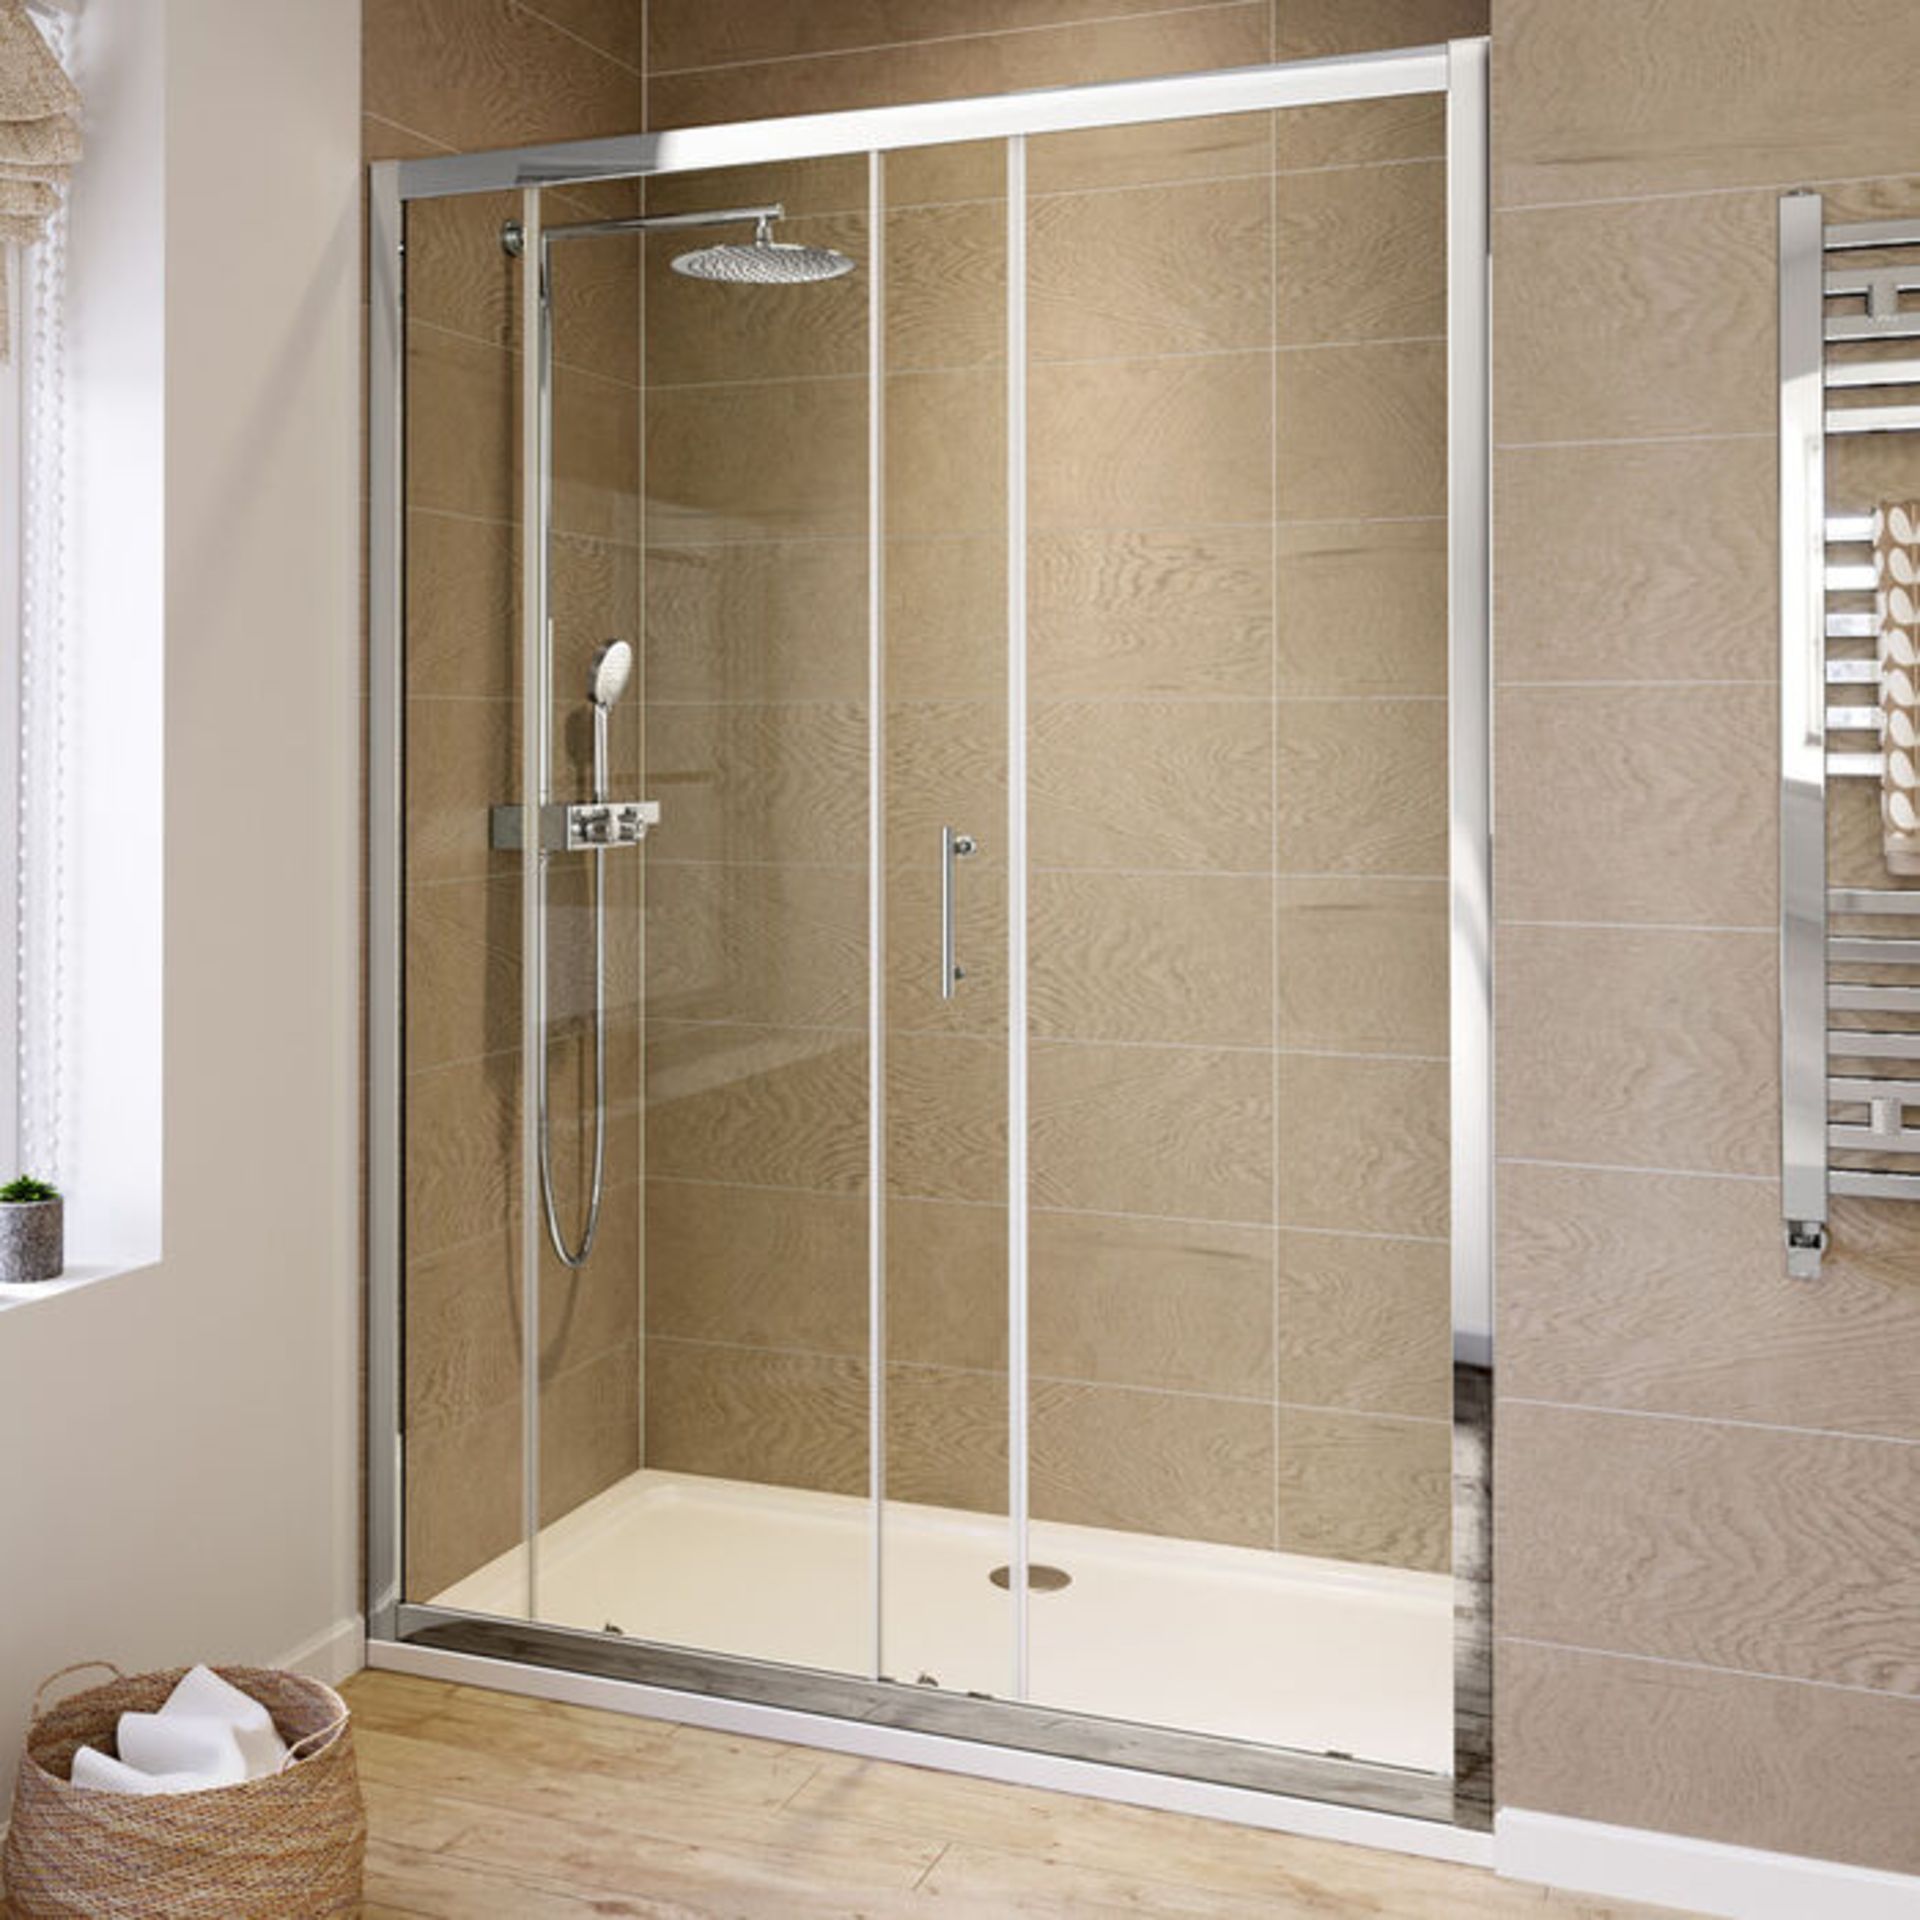 NEW & BOXED 1700mm - 6mm - Elements Sliding Shower Door. RRP £299.99.6mm Safety Glass Fully - Image 2 of 3